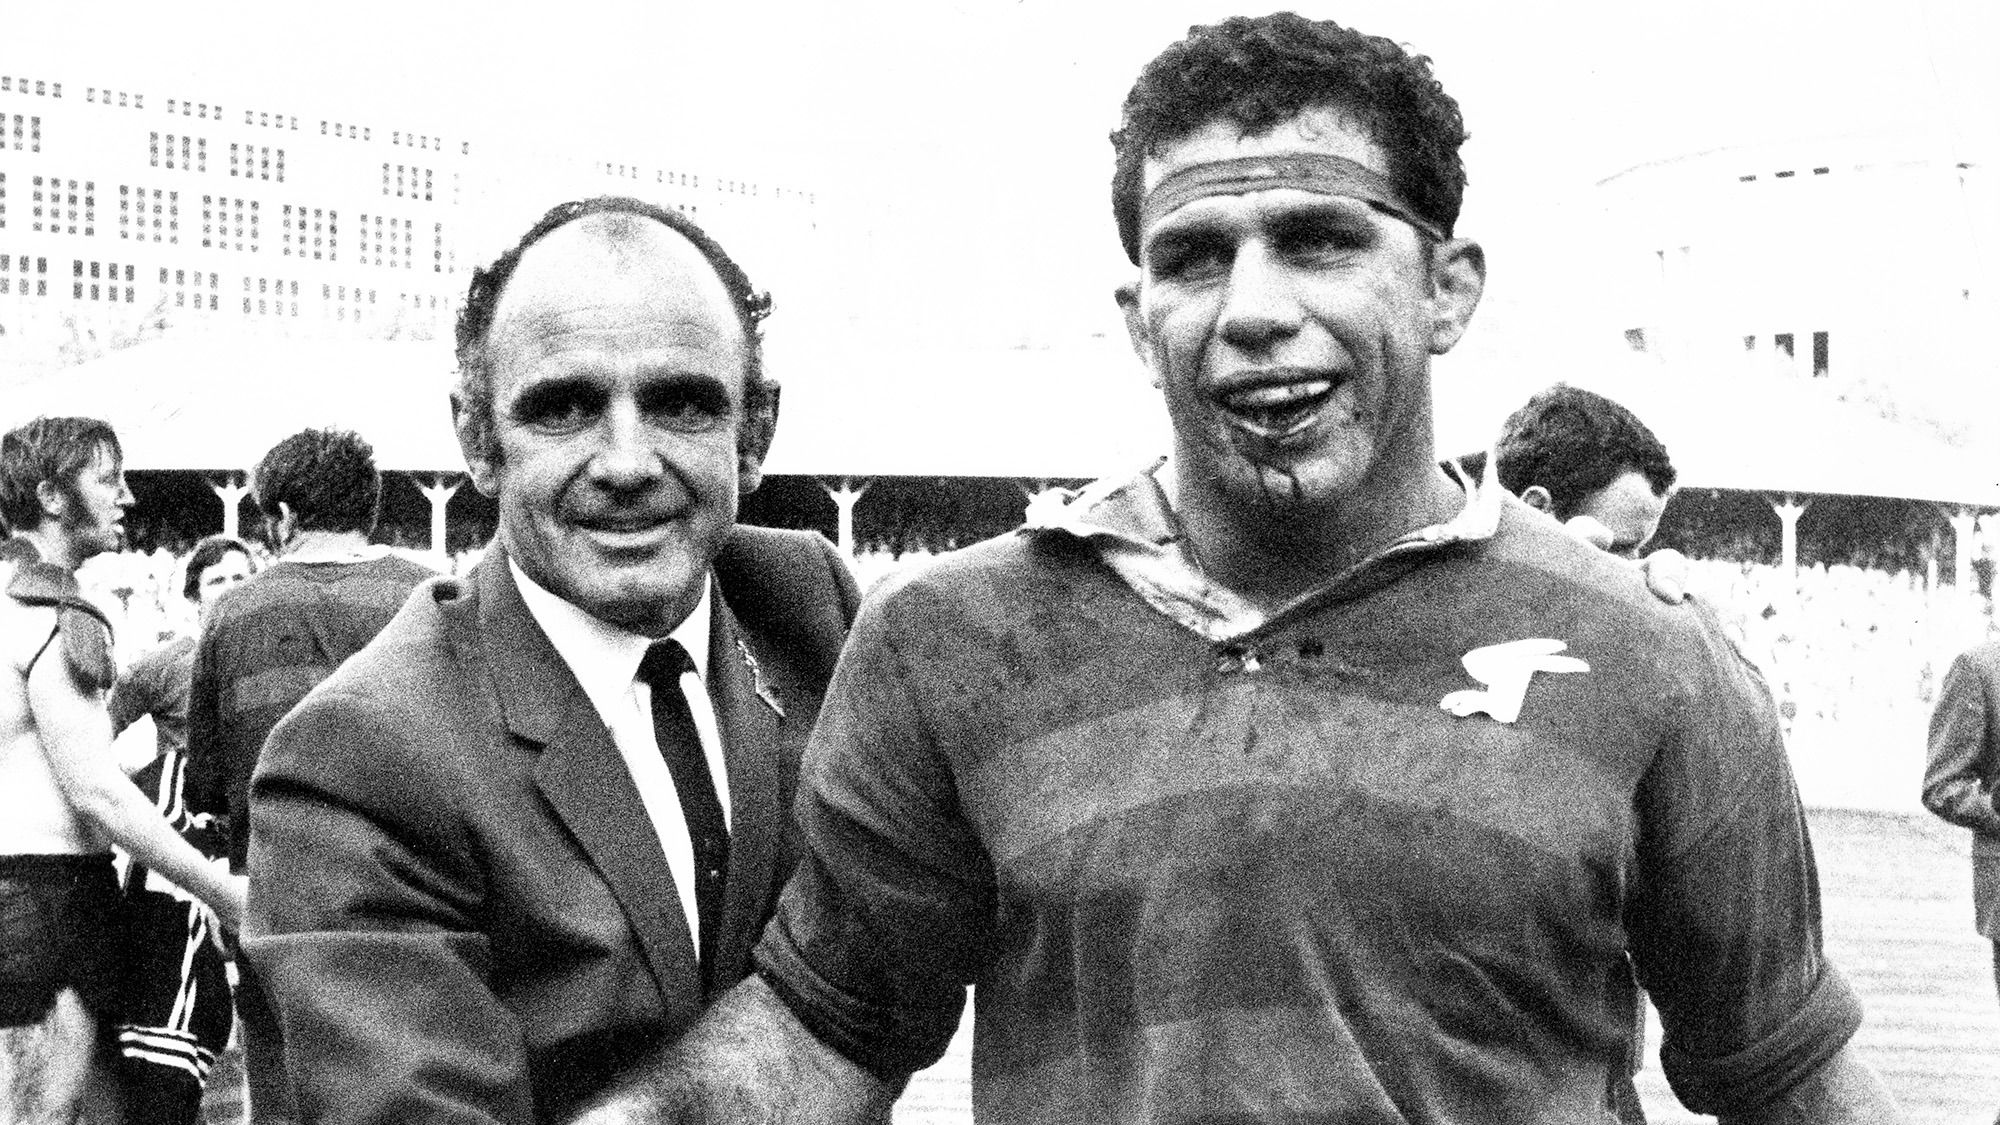 John Sattler leaves the field with a broken jaw after the 1970 grand final between the South Sydney Rabbitohs and the Balmain Tigers.